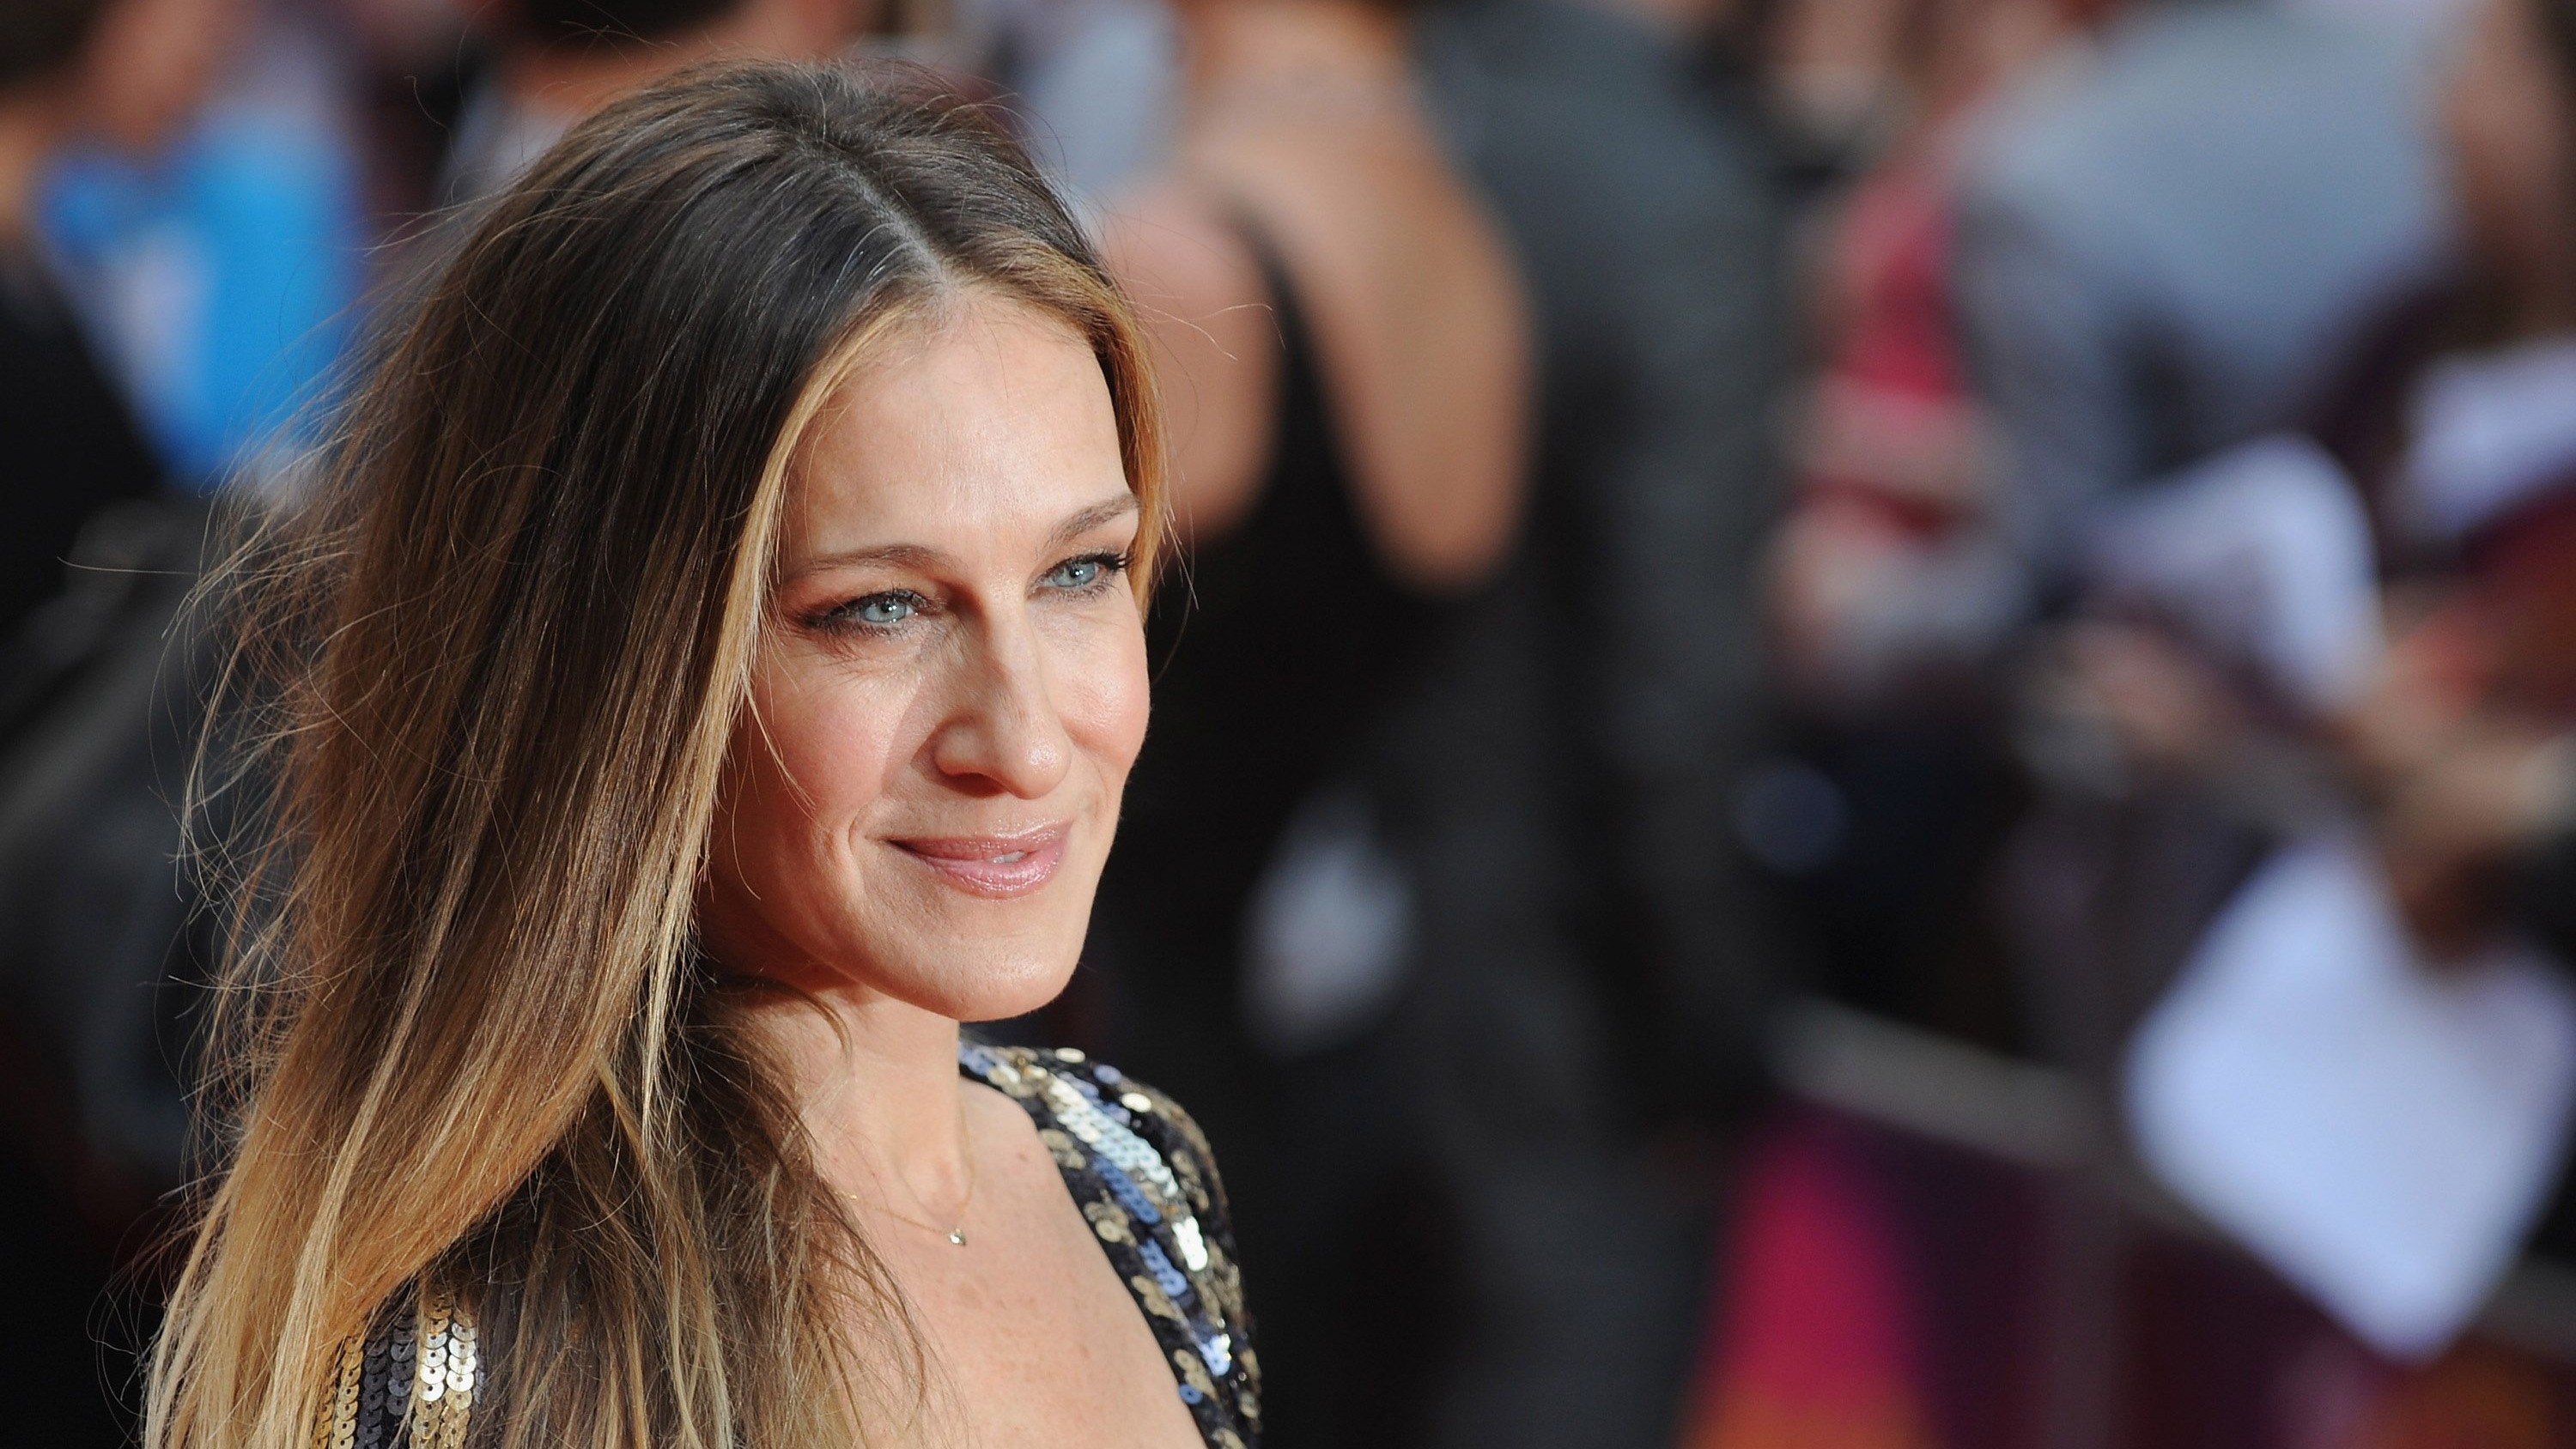 Sarah Jessica Parker Just Got Real About Aging In Hollywood